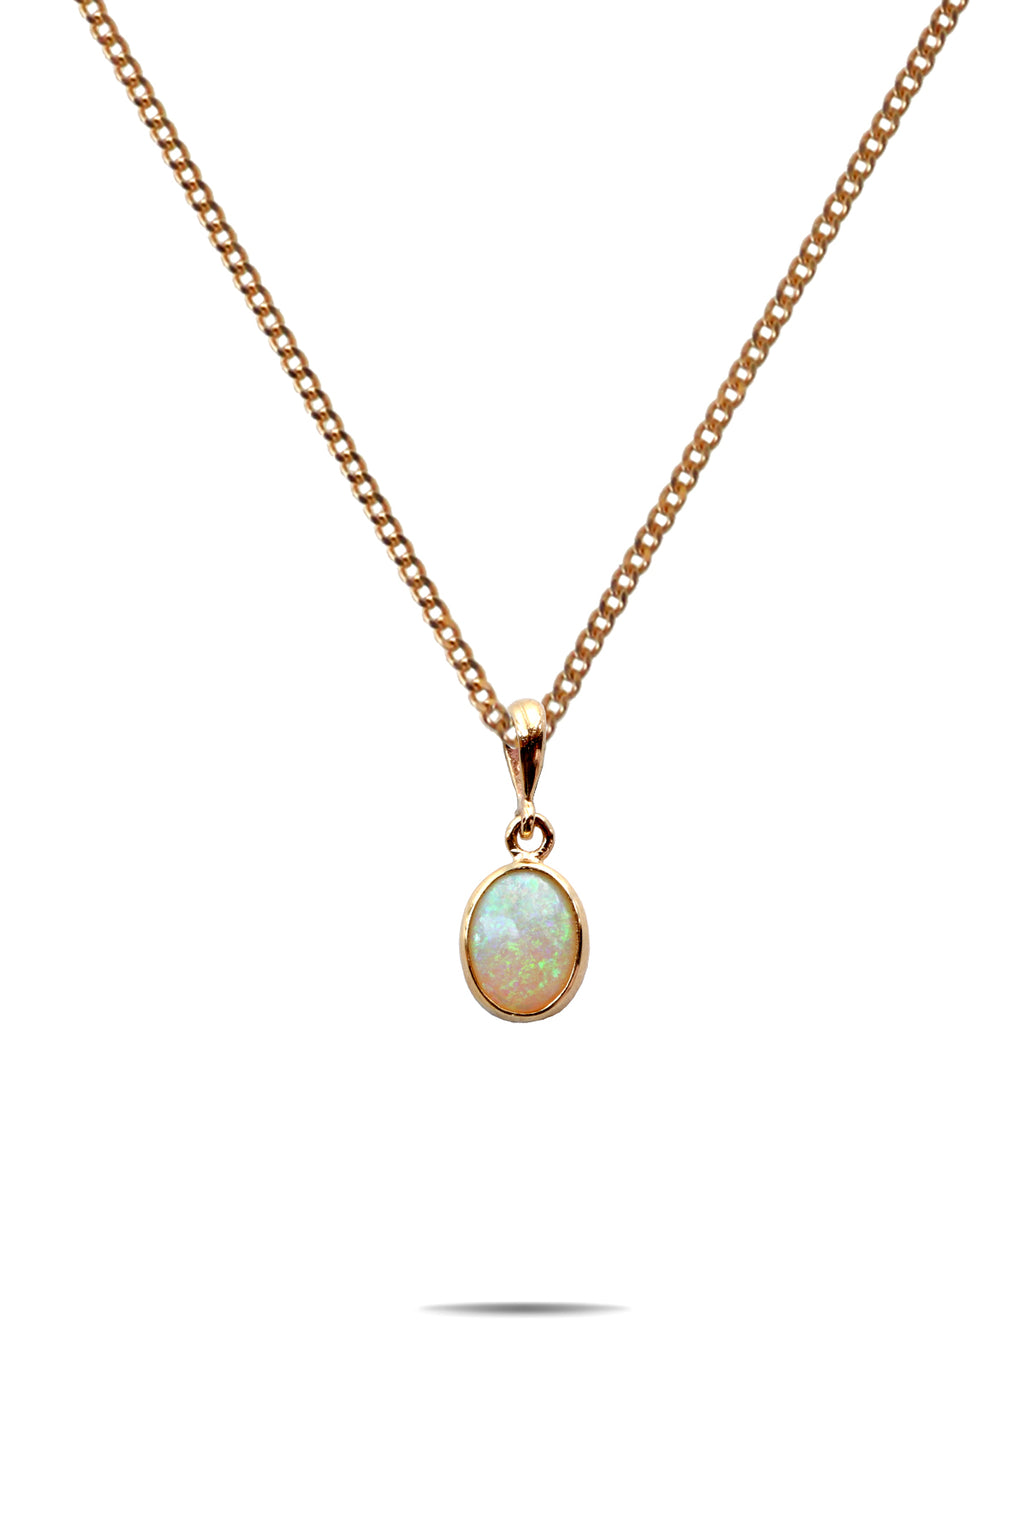 9ct Gold Small Opal Pendant